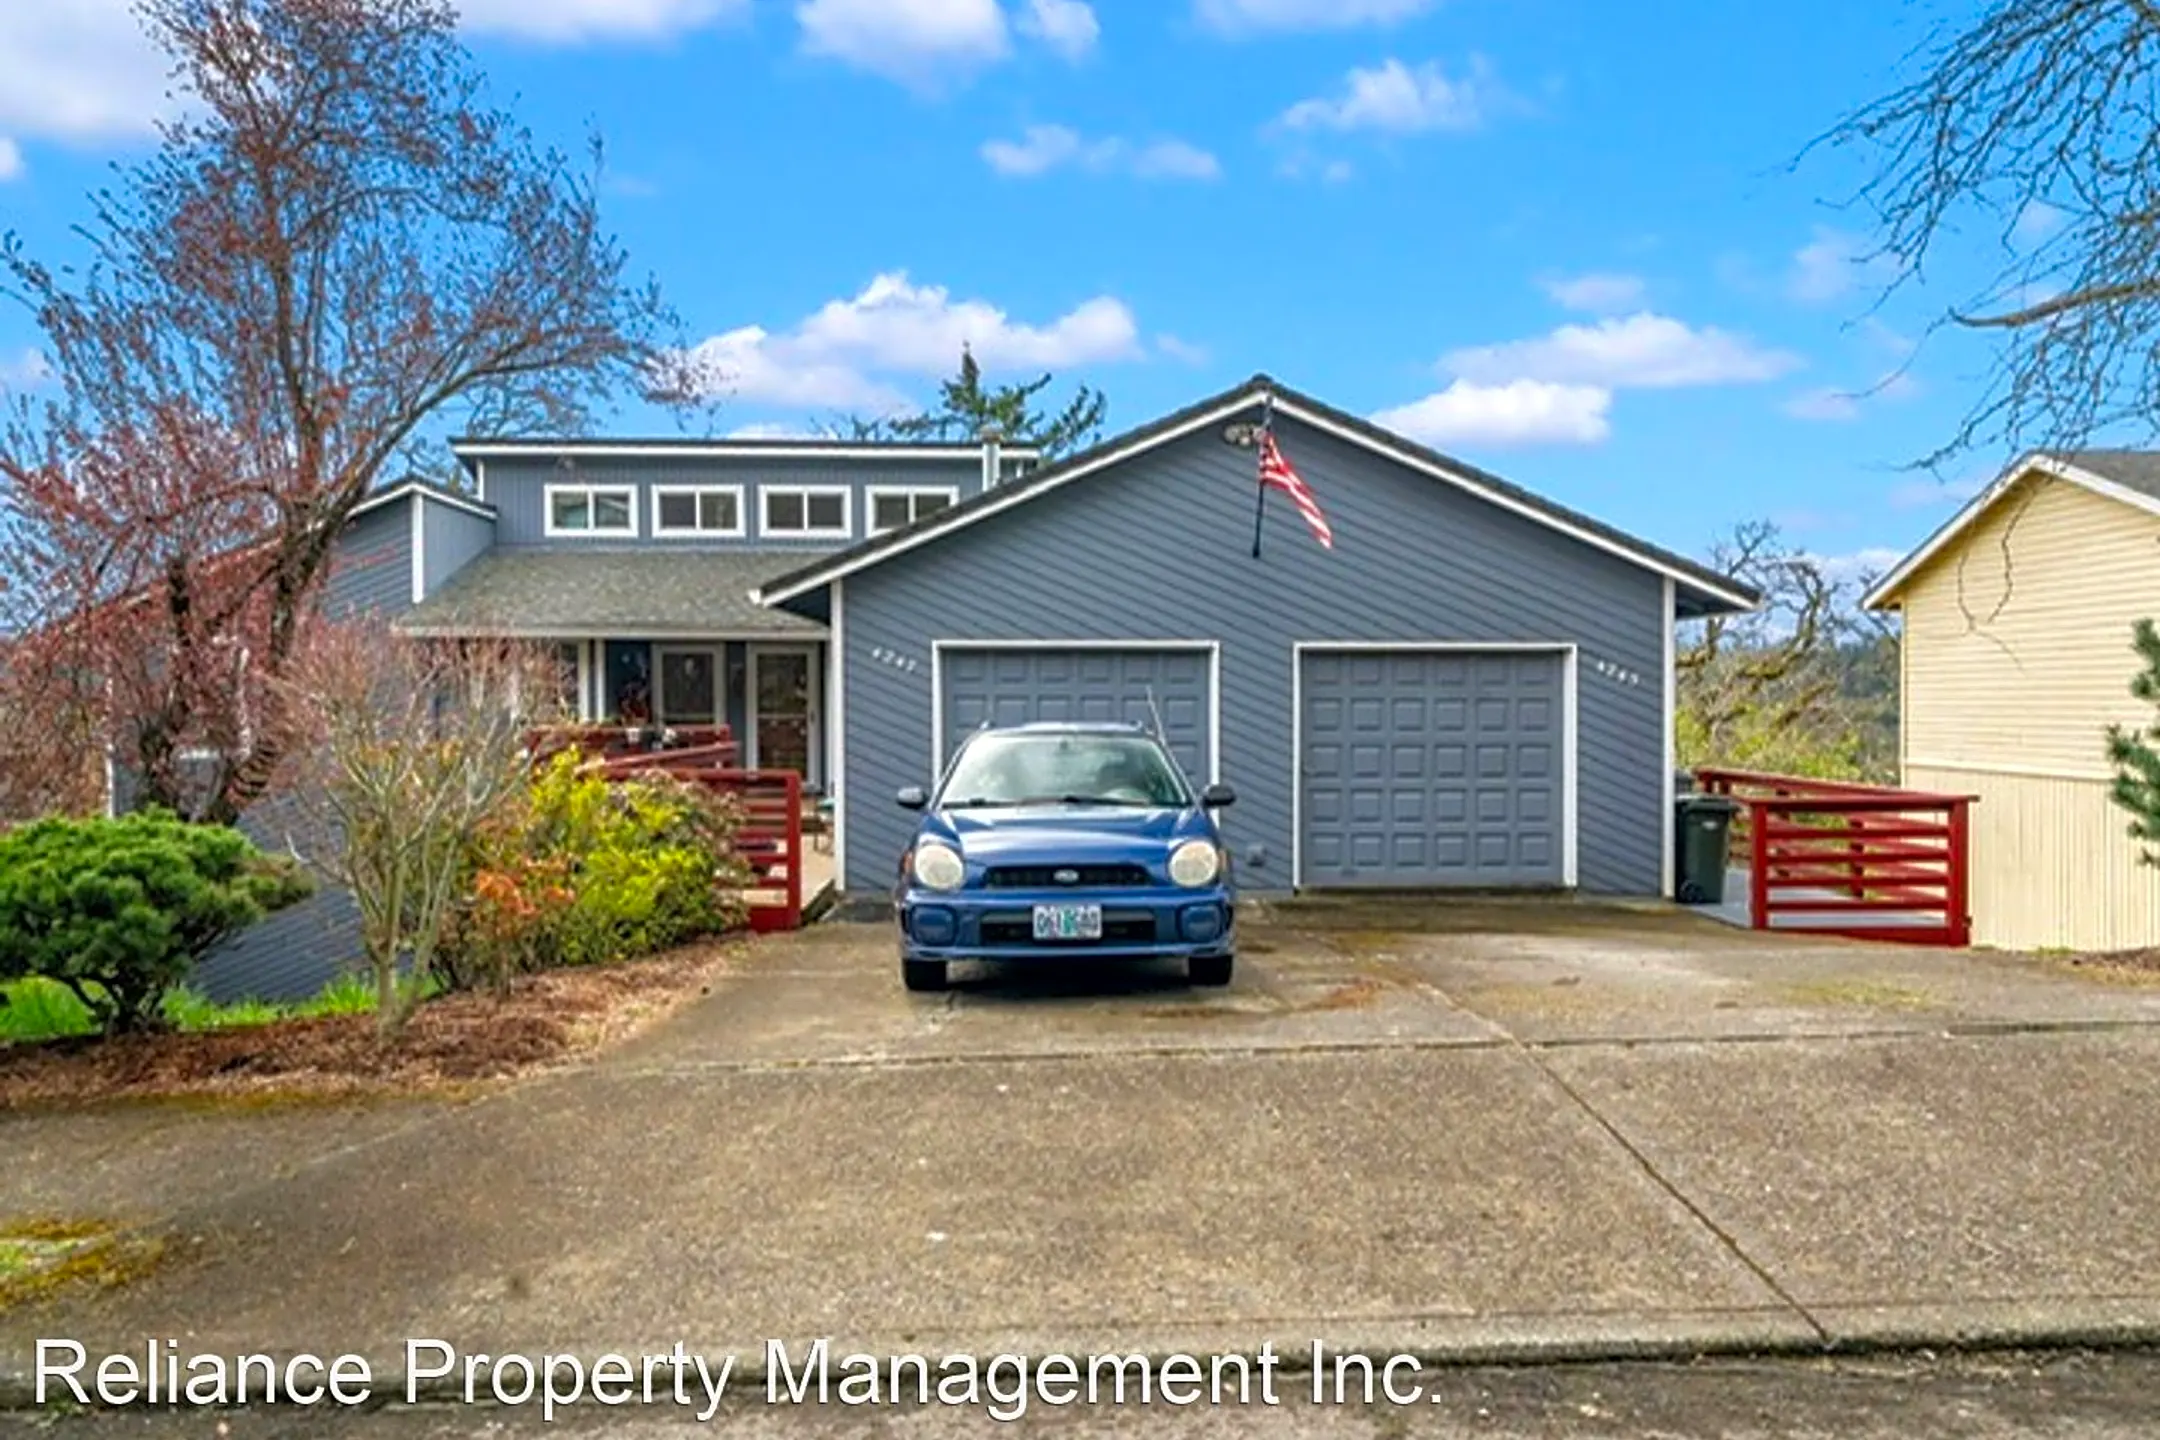 Building - 4245 Imperial Dr - West Linn, OR